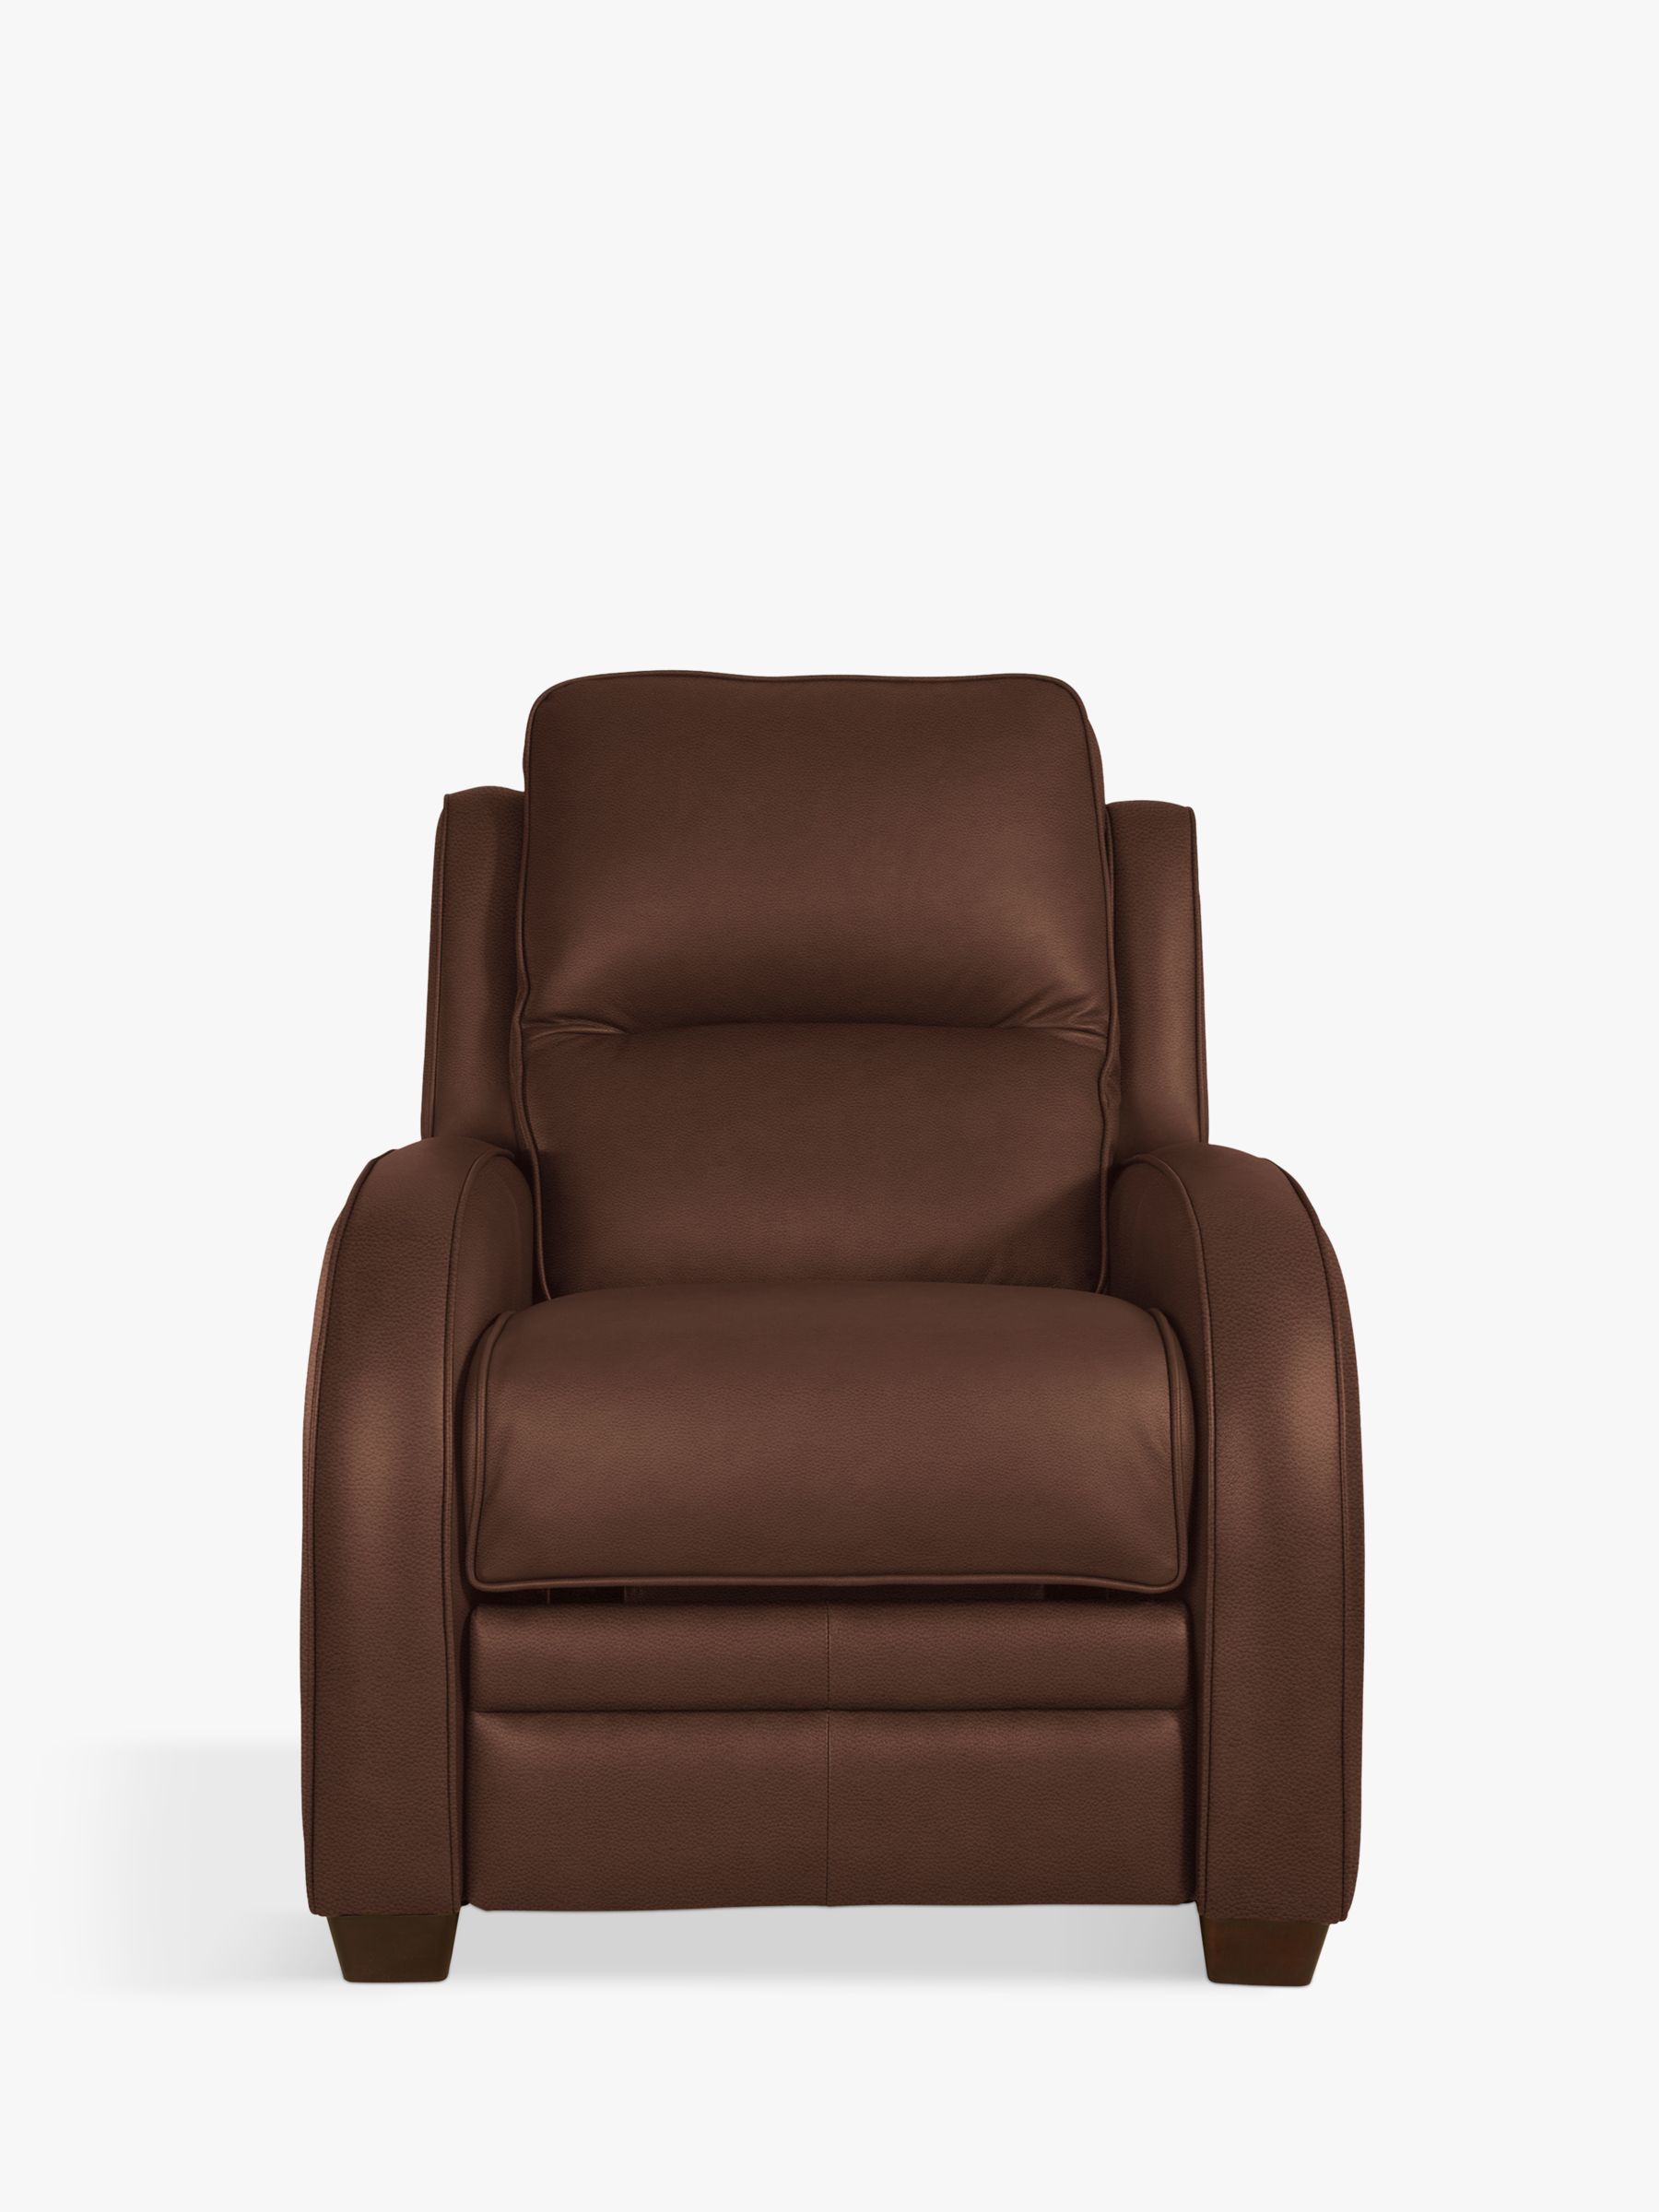 Photo of Parker knoll charleston leather power recliner armchair